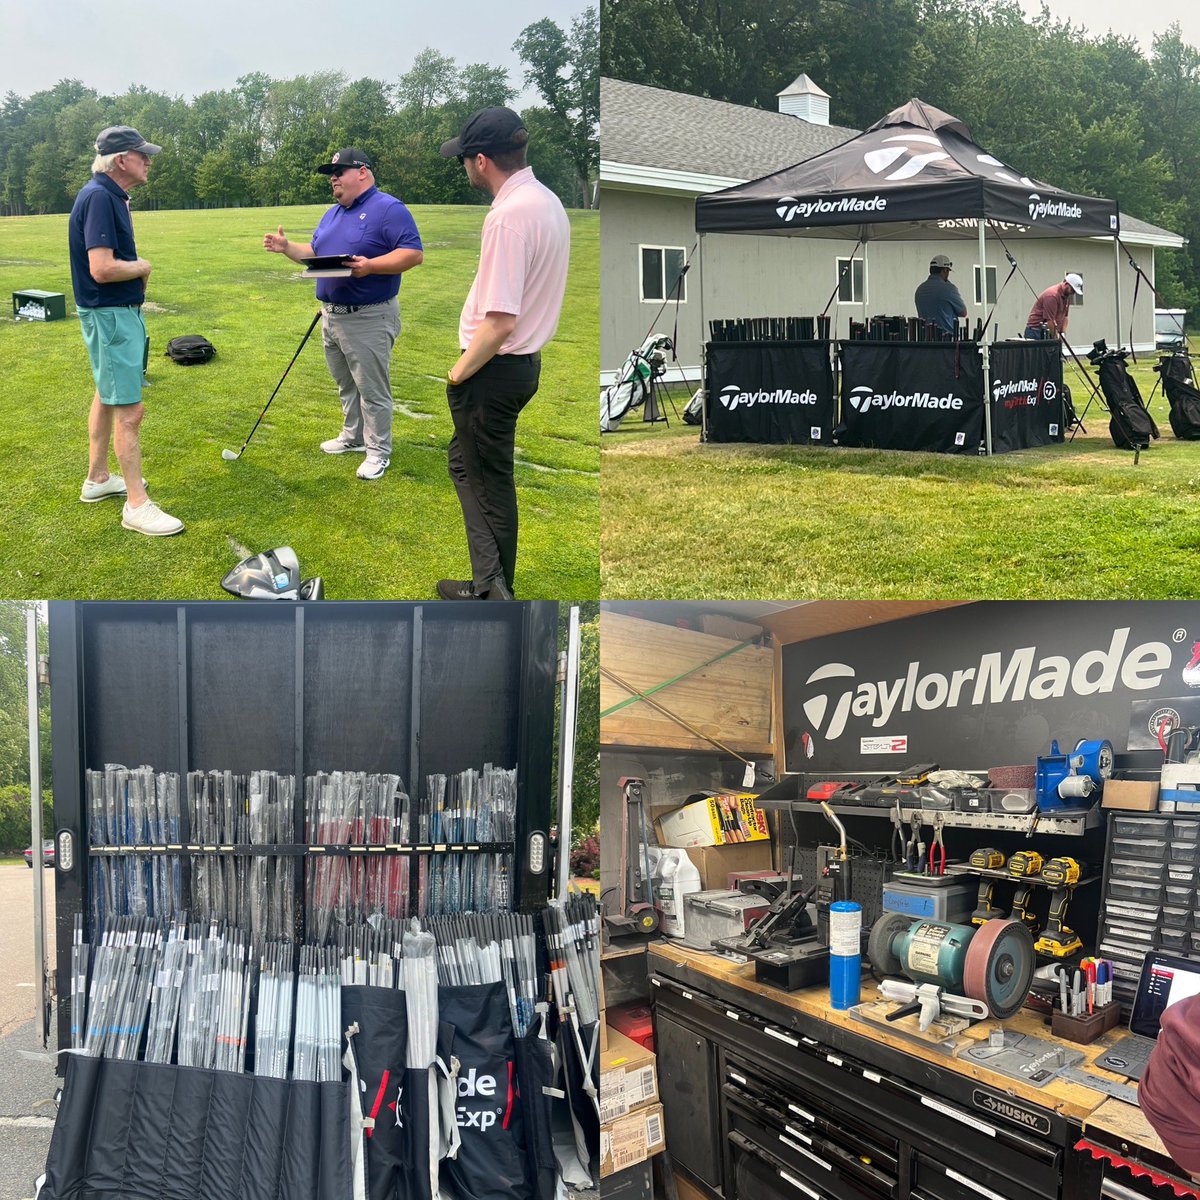 An excellent afternoon for the Charter Oak members, thanks to the @TaylorMadeGolf fitting team. #charteroakcc #taylormadegolf #clubfitting #teamtaylormade